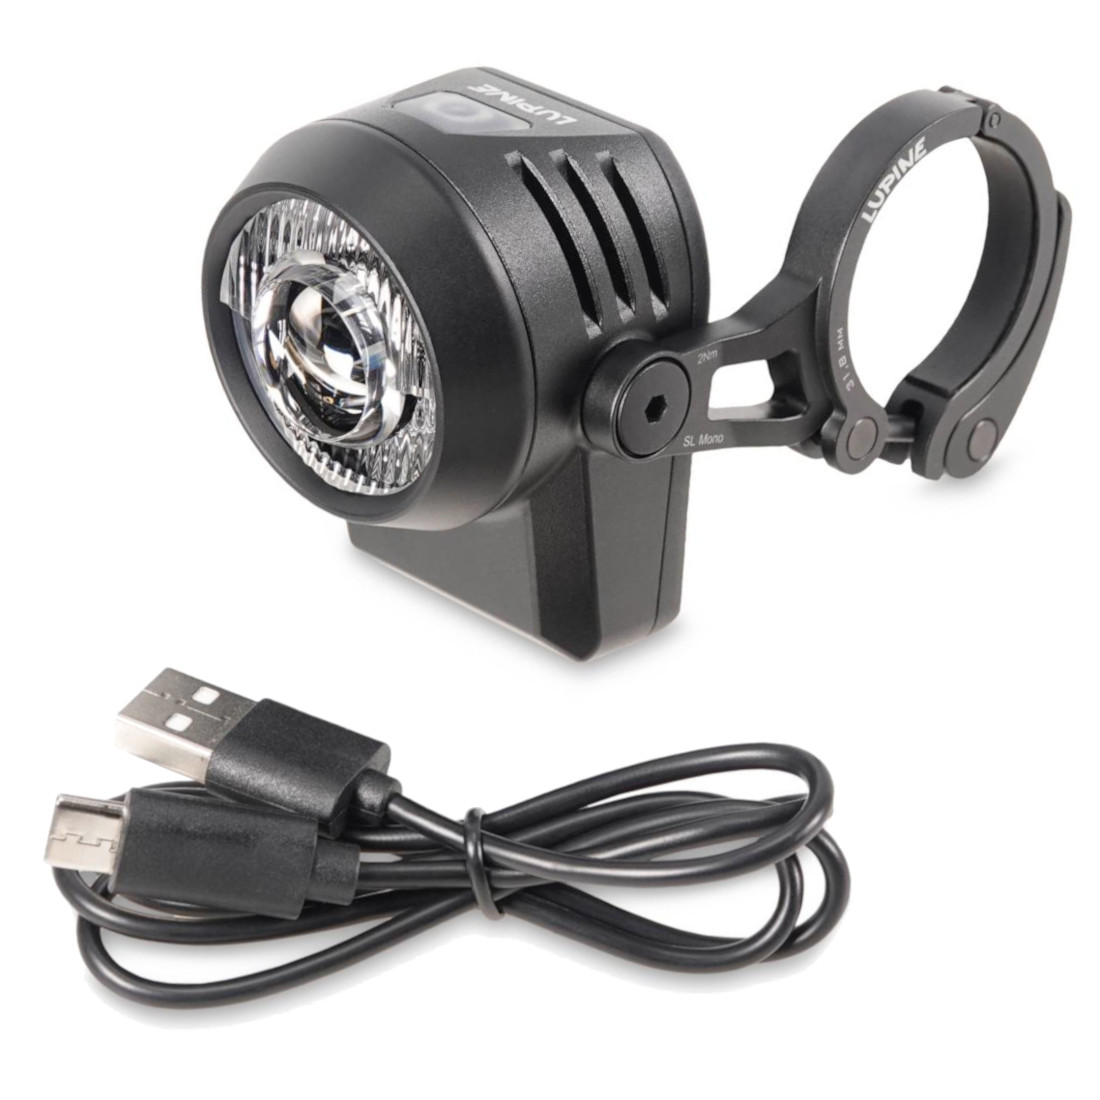 Picture of Lupine SL Mono Front Light - 31.8mm